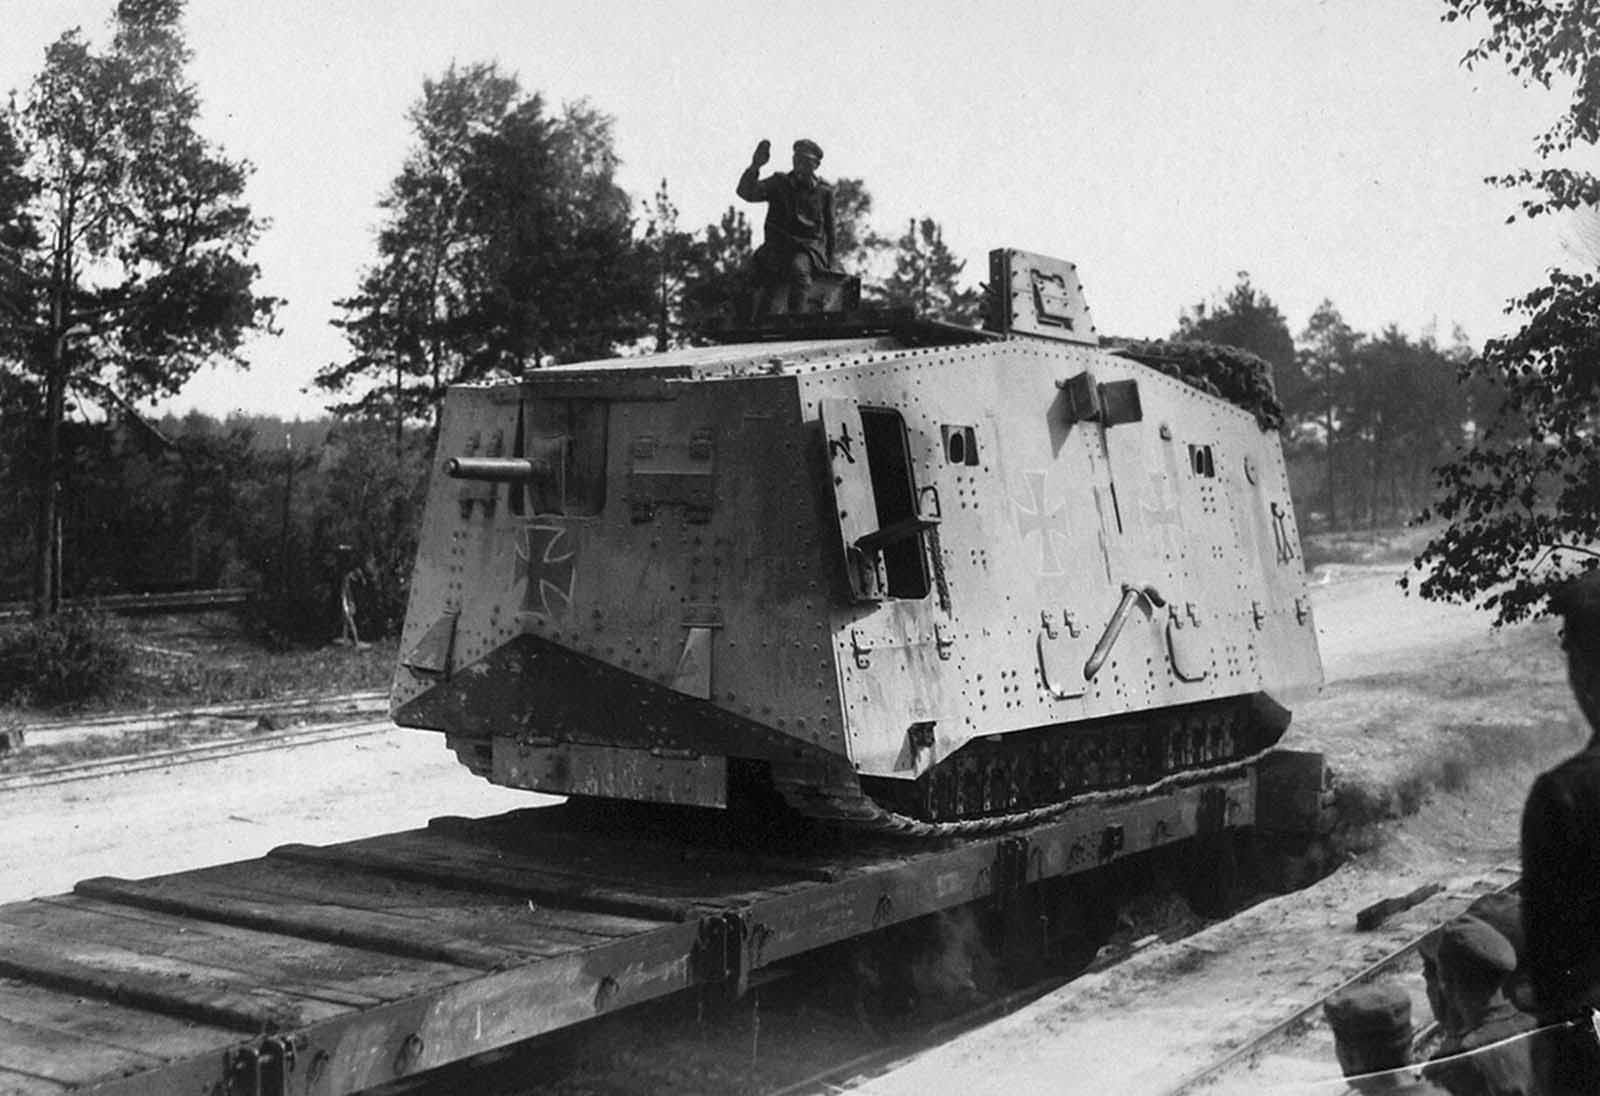 Western front, loading a German A7V tank onto a railroad flat car. Fewer than a hundred A7Vs were ever produced, the only tanks manufactured by Germany that they used in the war. German troops did manage to capture and make use of a number of allied tanks, however.